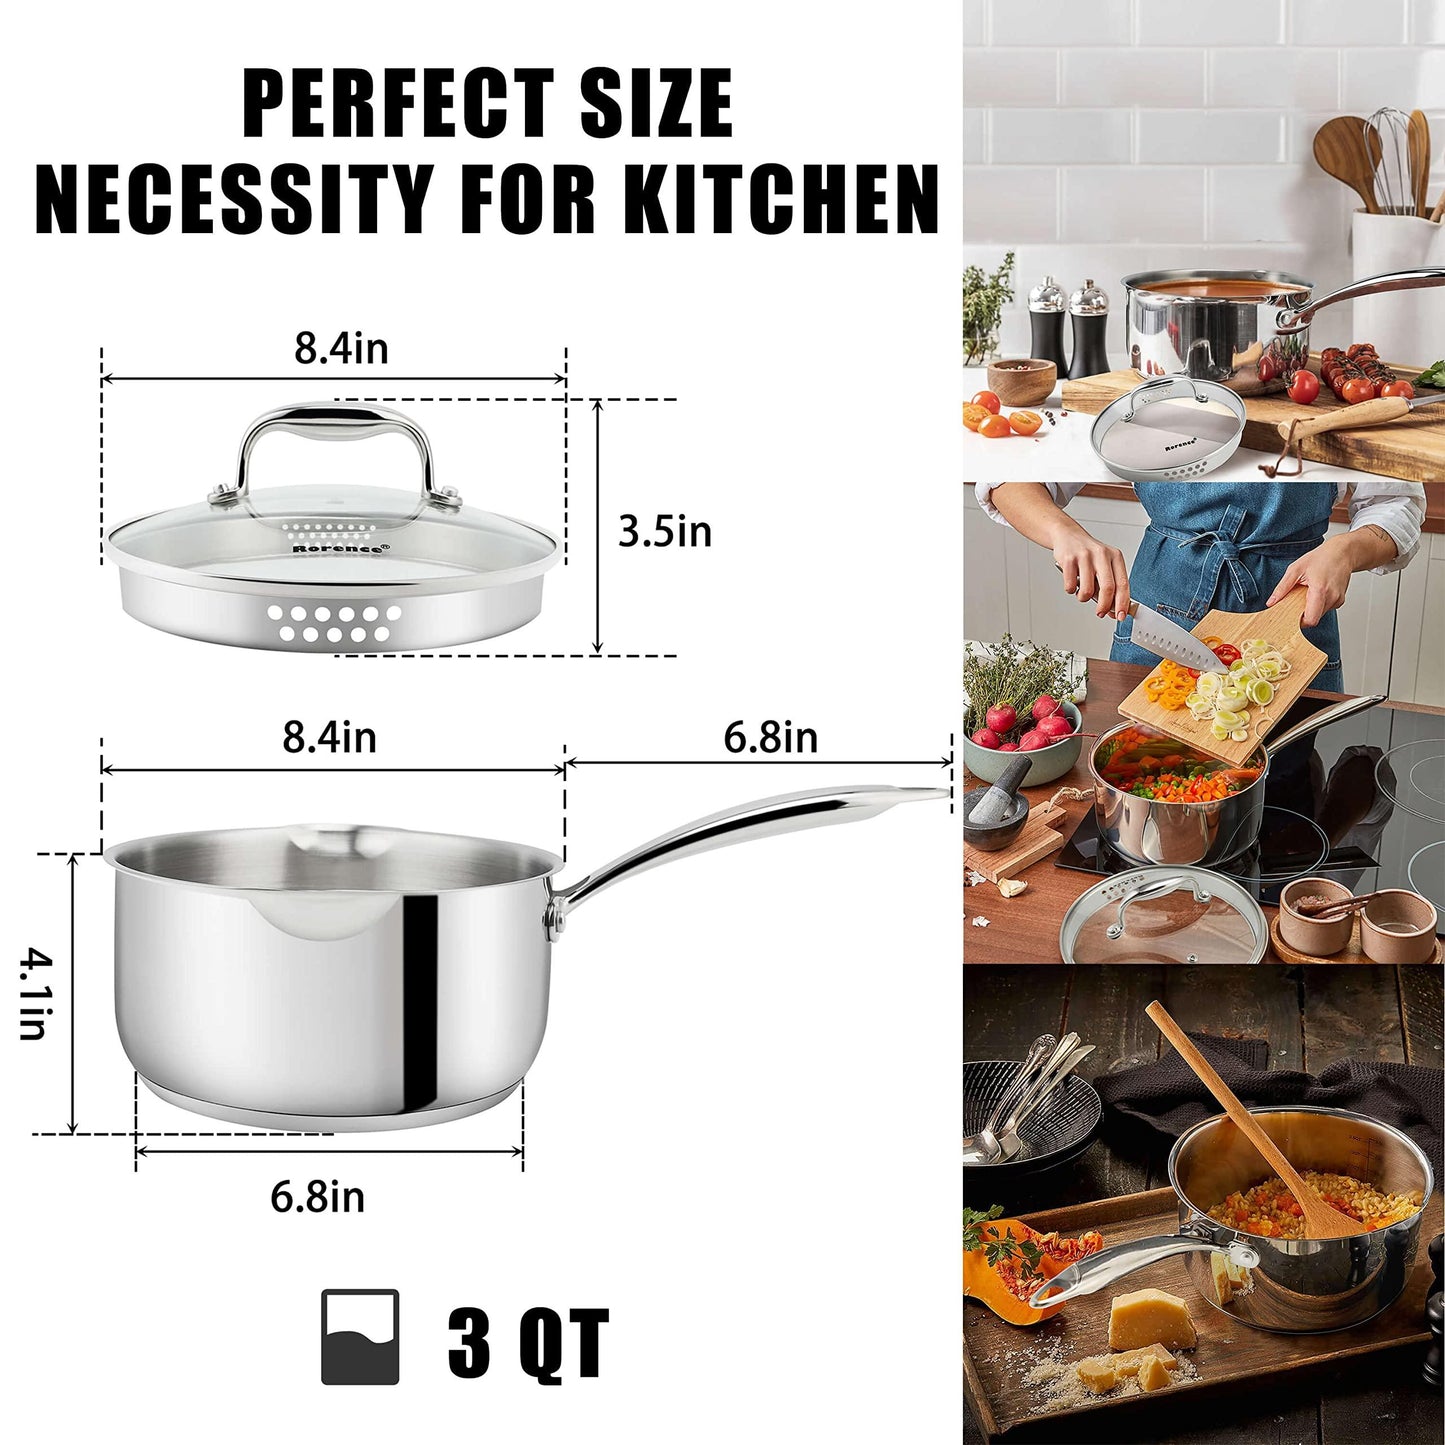 Rorence 3-Quart Saucepan with Lid: Pour and Strain Stainless Steel Sauce Pan with Pour Spouts, Capsule Bottom & Tempered Glass Lid - CookCave